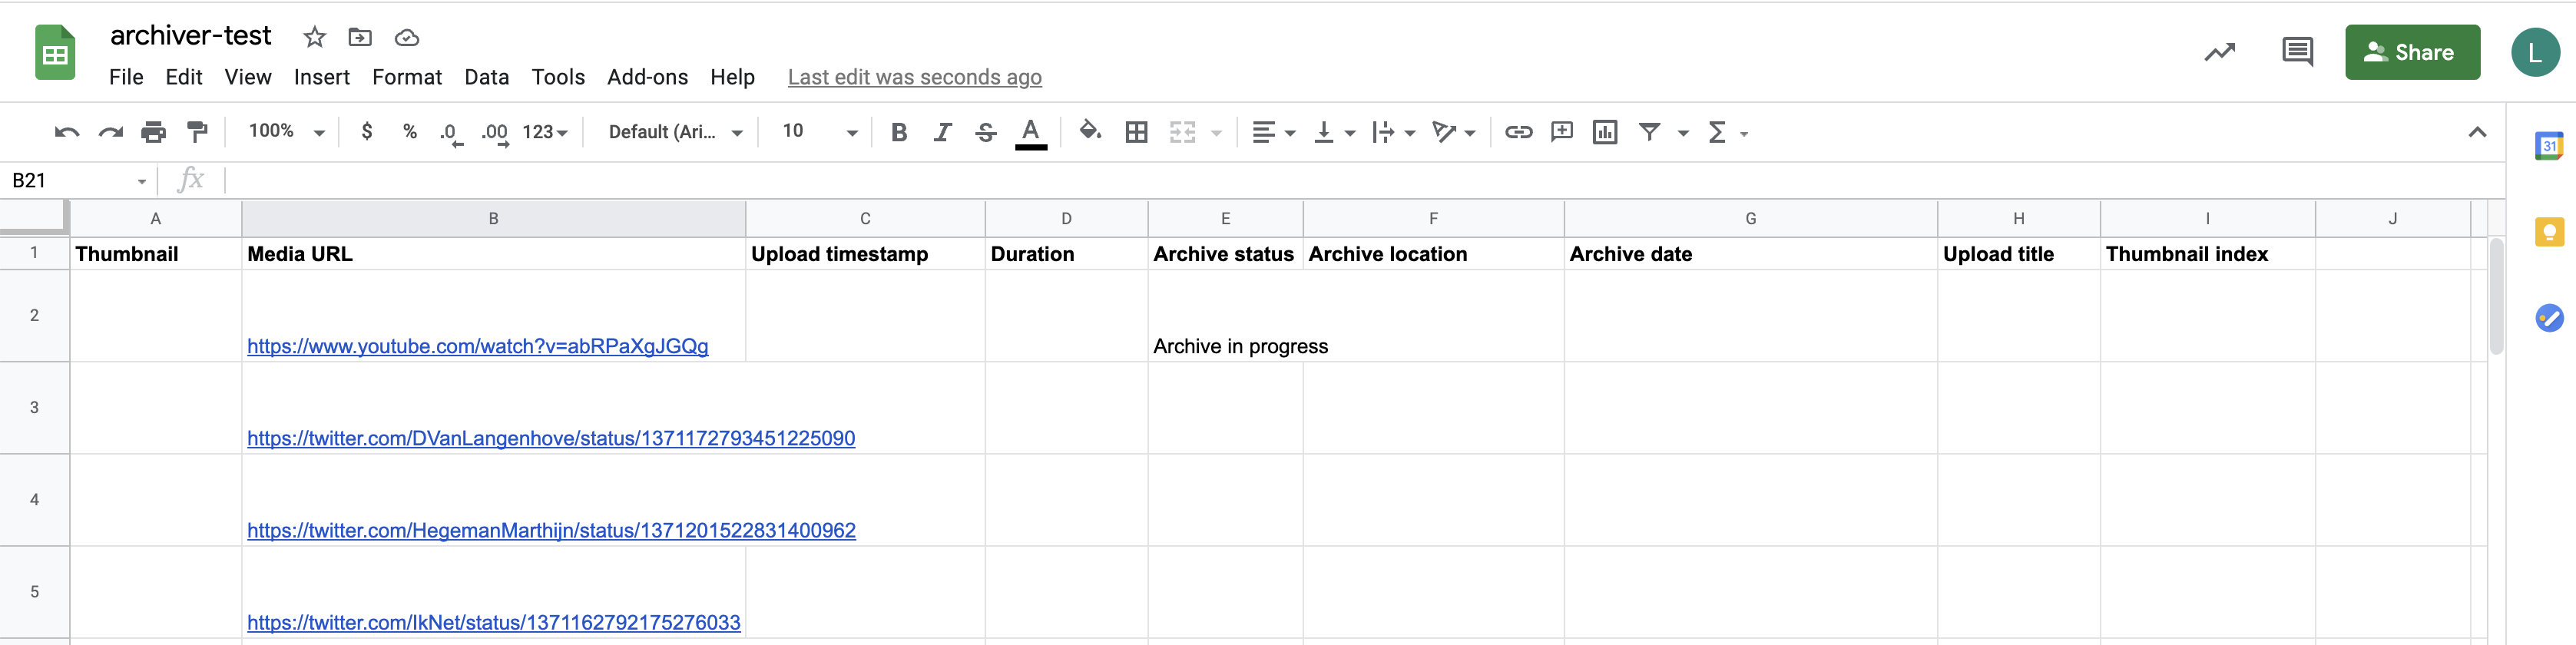 A screenshot of a Google Spreadsheet with column headers defined as above, and several Youtube and Twitter URLs in the "Media URL" column. The auto archiver has added "archive in progress" to one of the status columns.